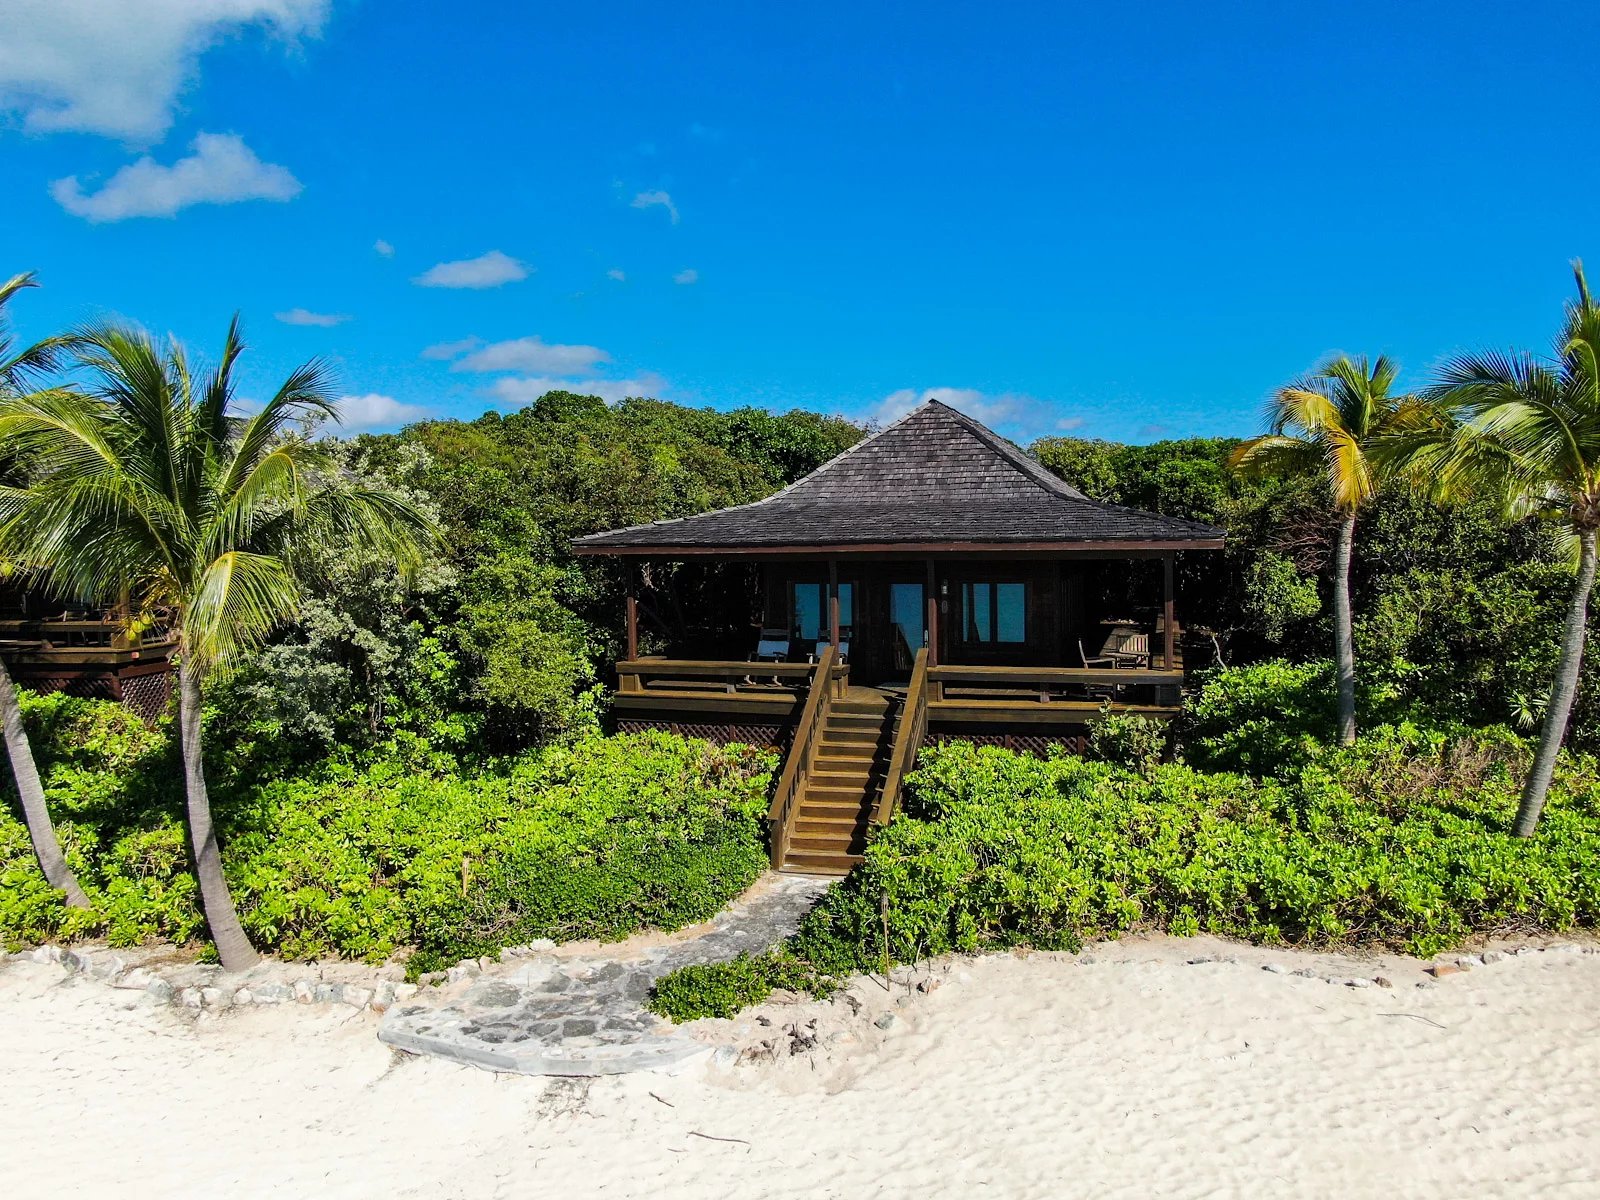 royal island, the perfect private island opportunity - mls 51444 image30